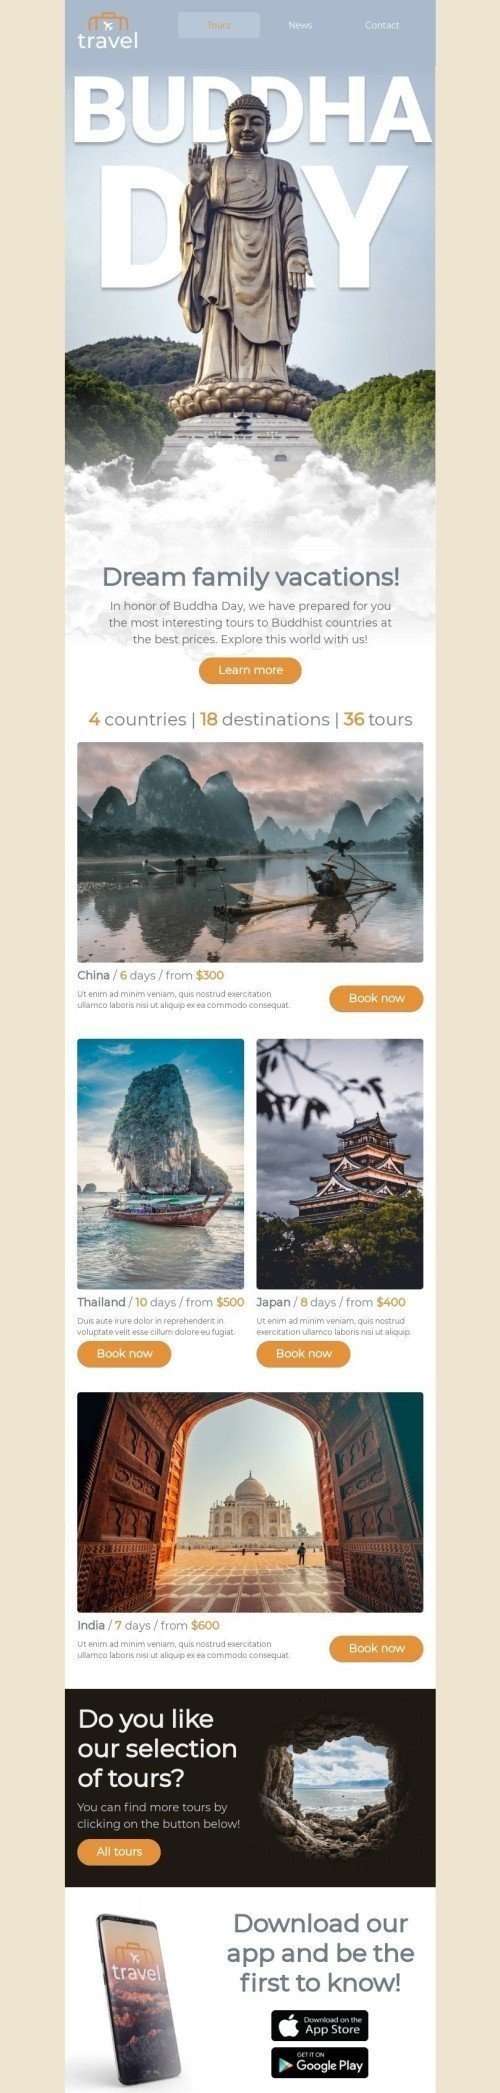 Buddha day Email Template «Dream family vacations» for Travel industry desktop view